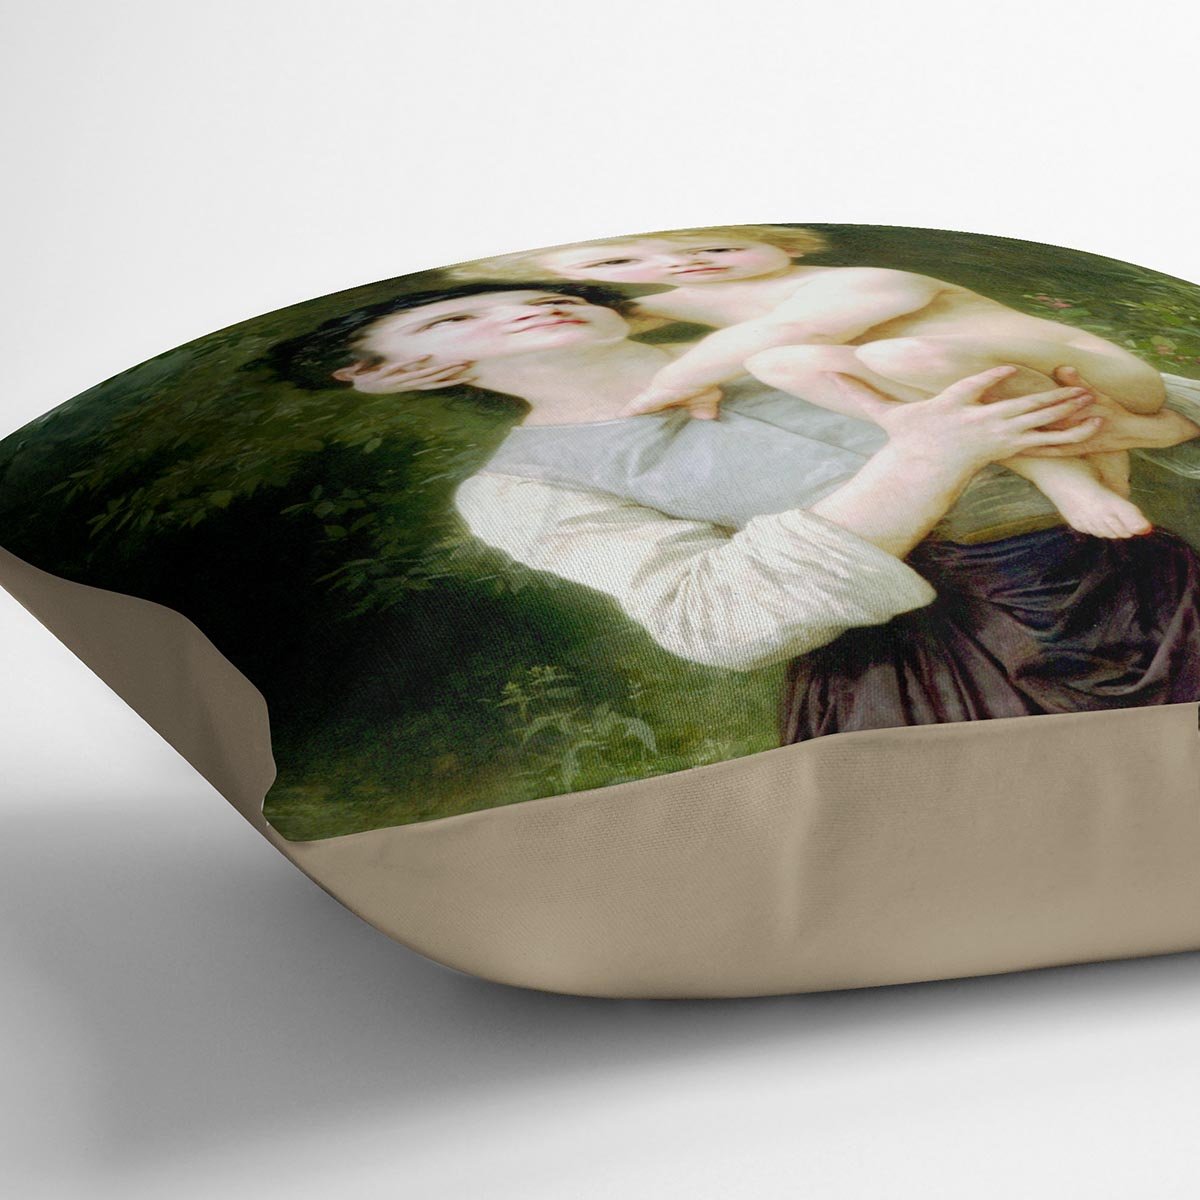 Brother And Sister By Bouguereau Throw Pillow